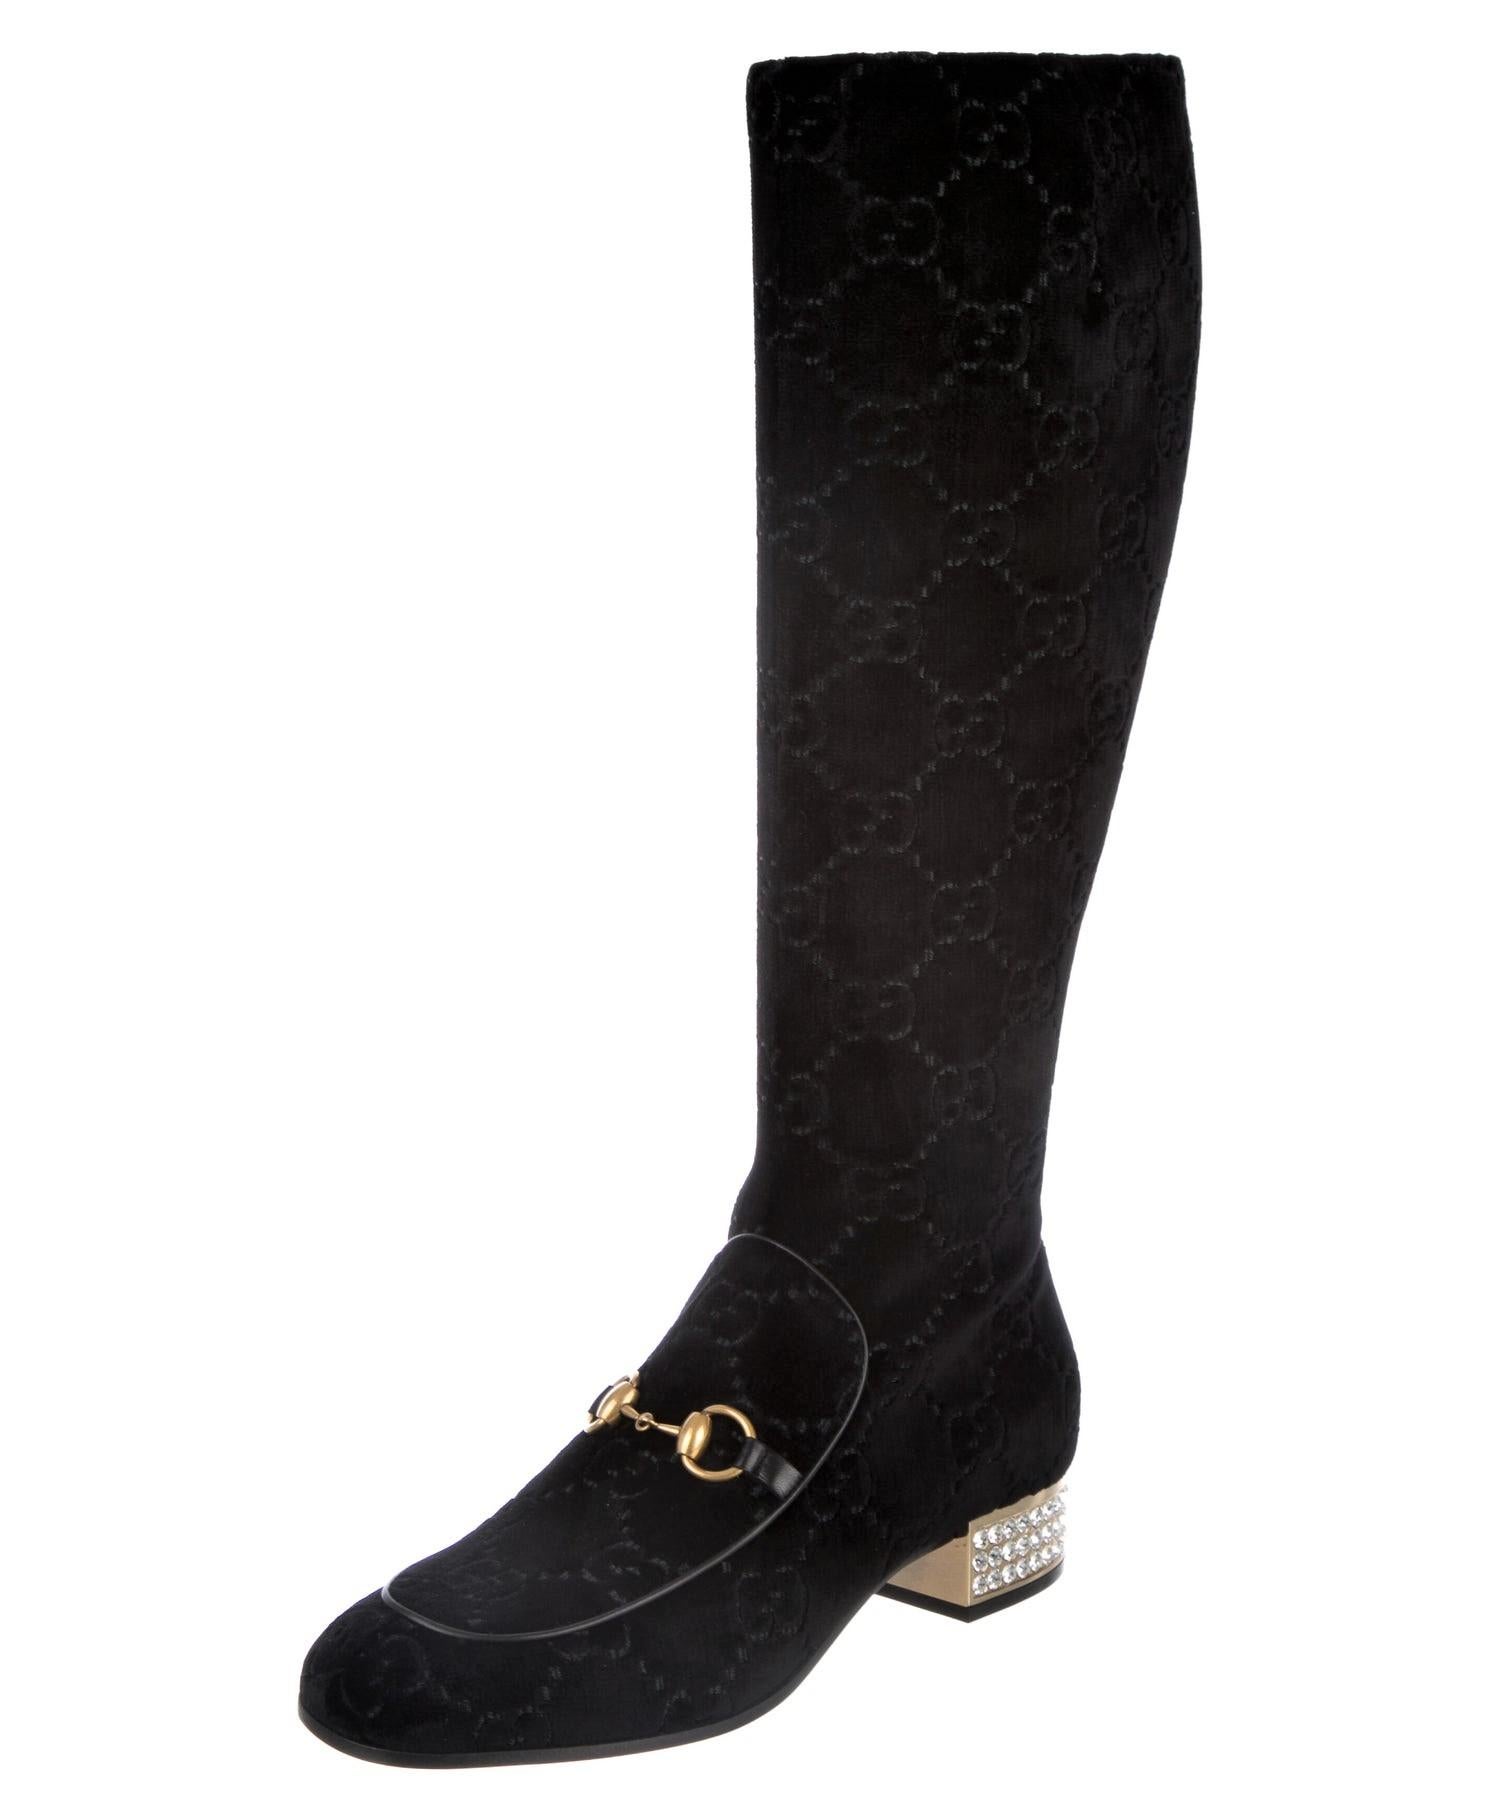 Black New Gucci GG Velvet Crystal Boots With Box Sz 38